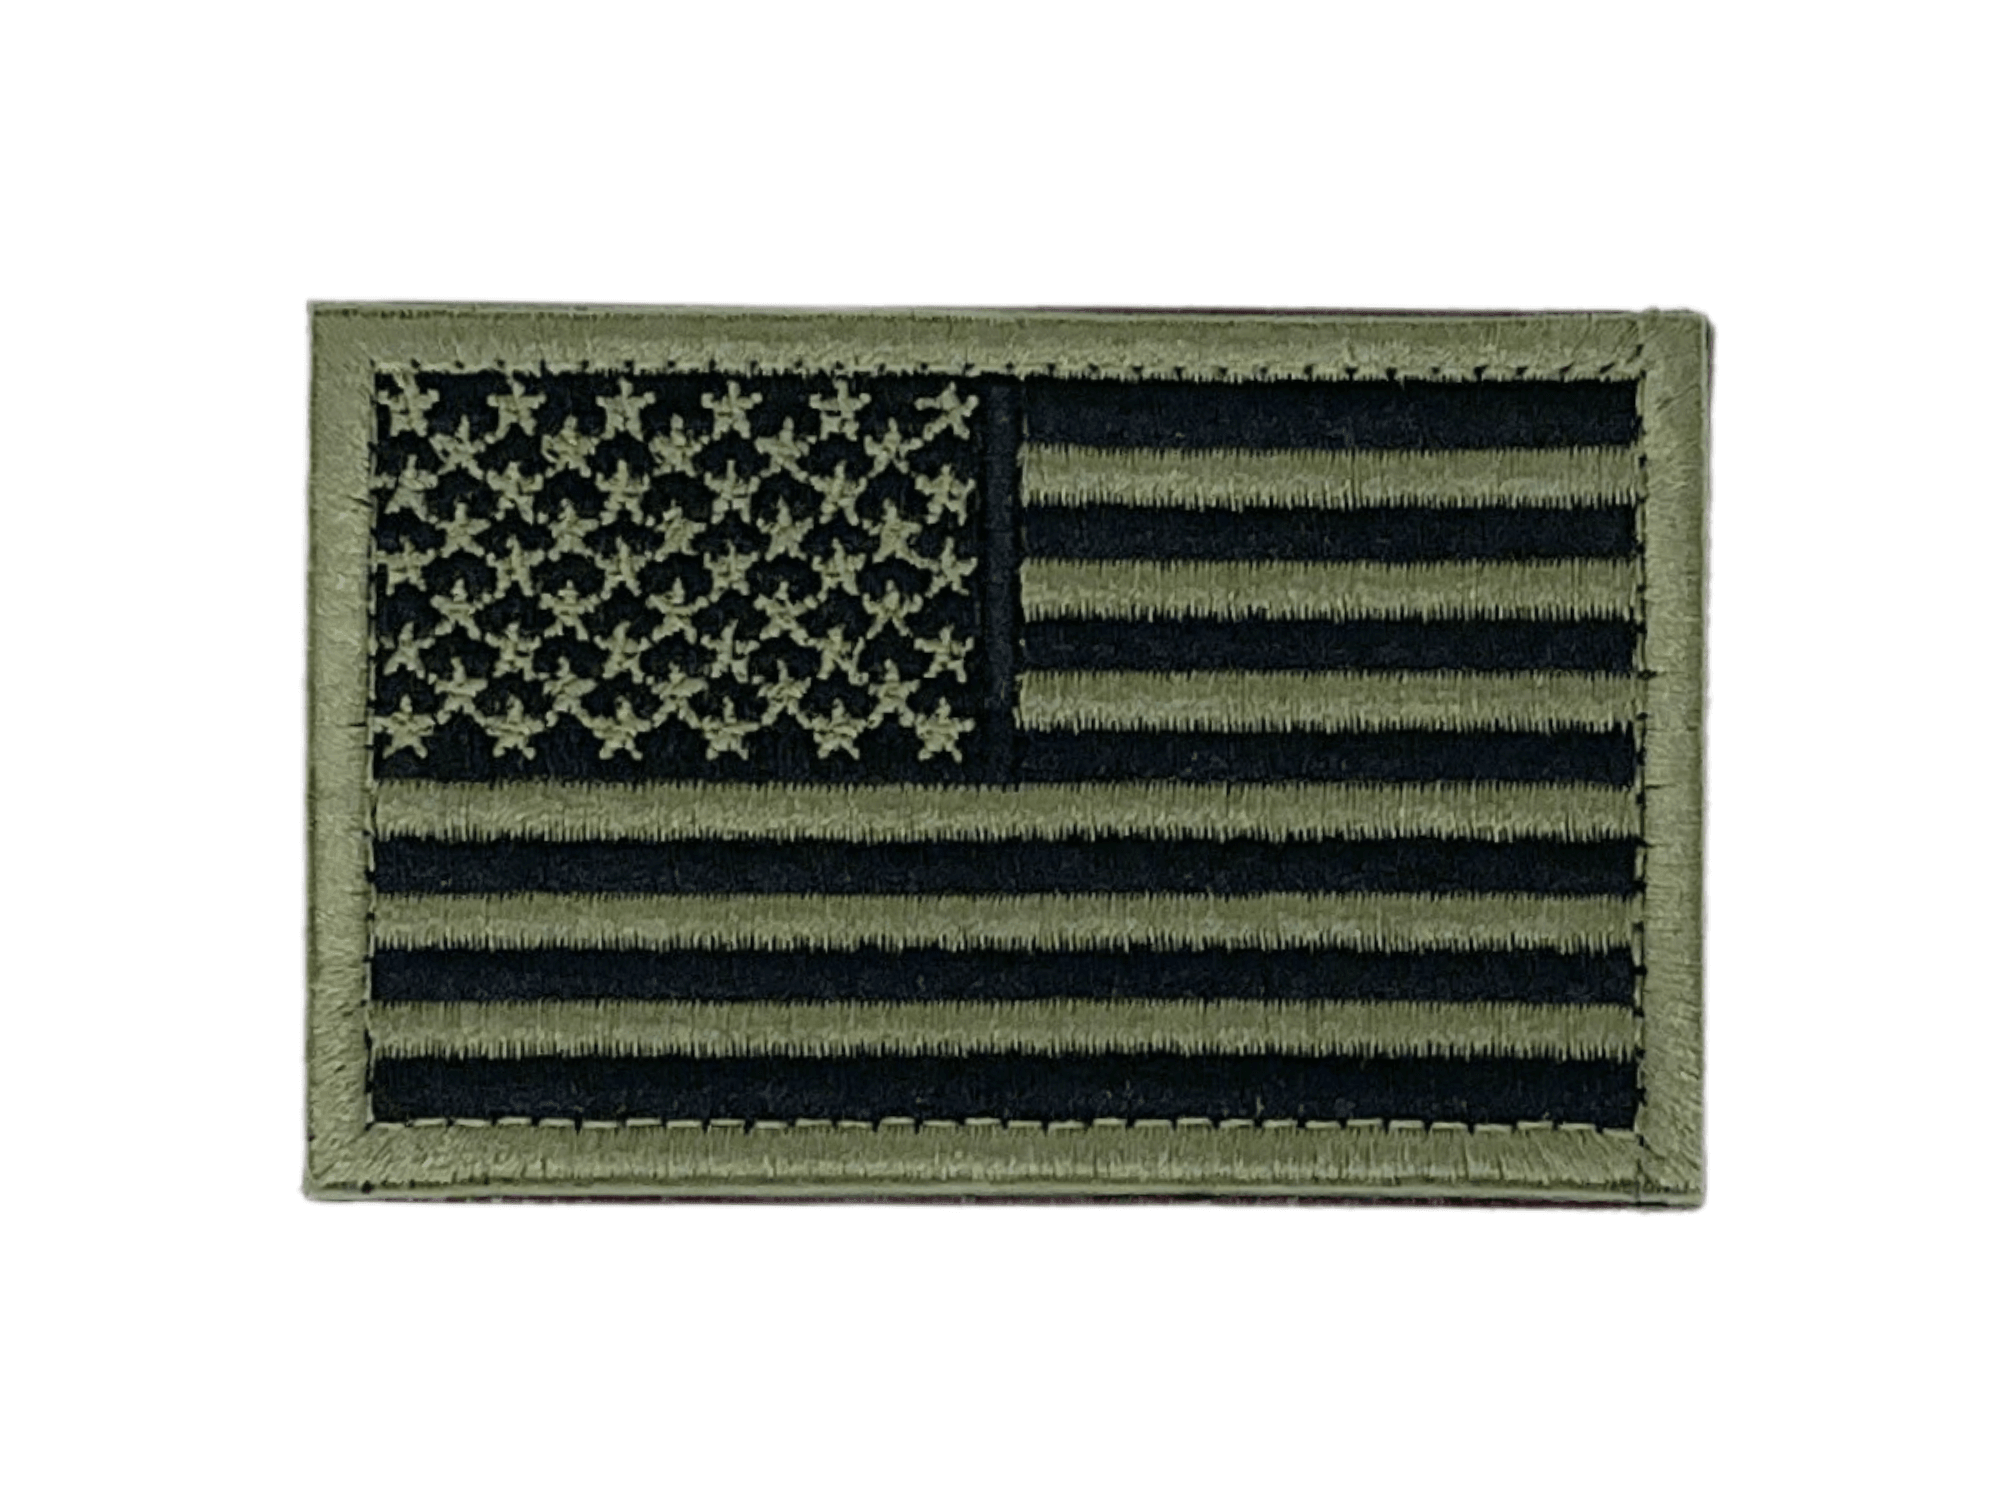 Tactical USA Flag Patch with Detachable Backing - VirtuousWares:Global